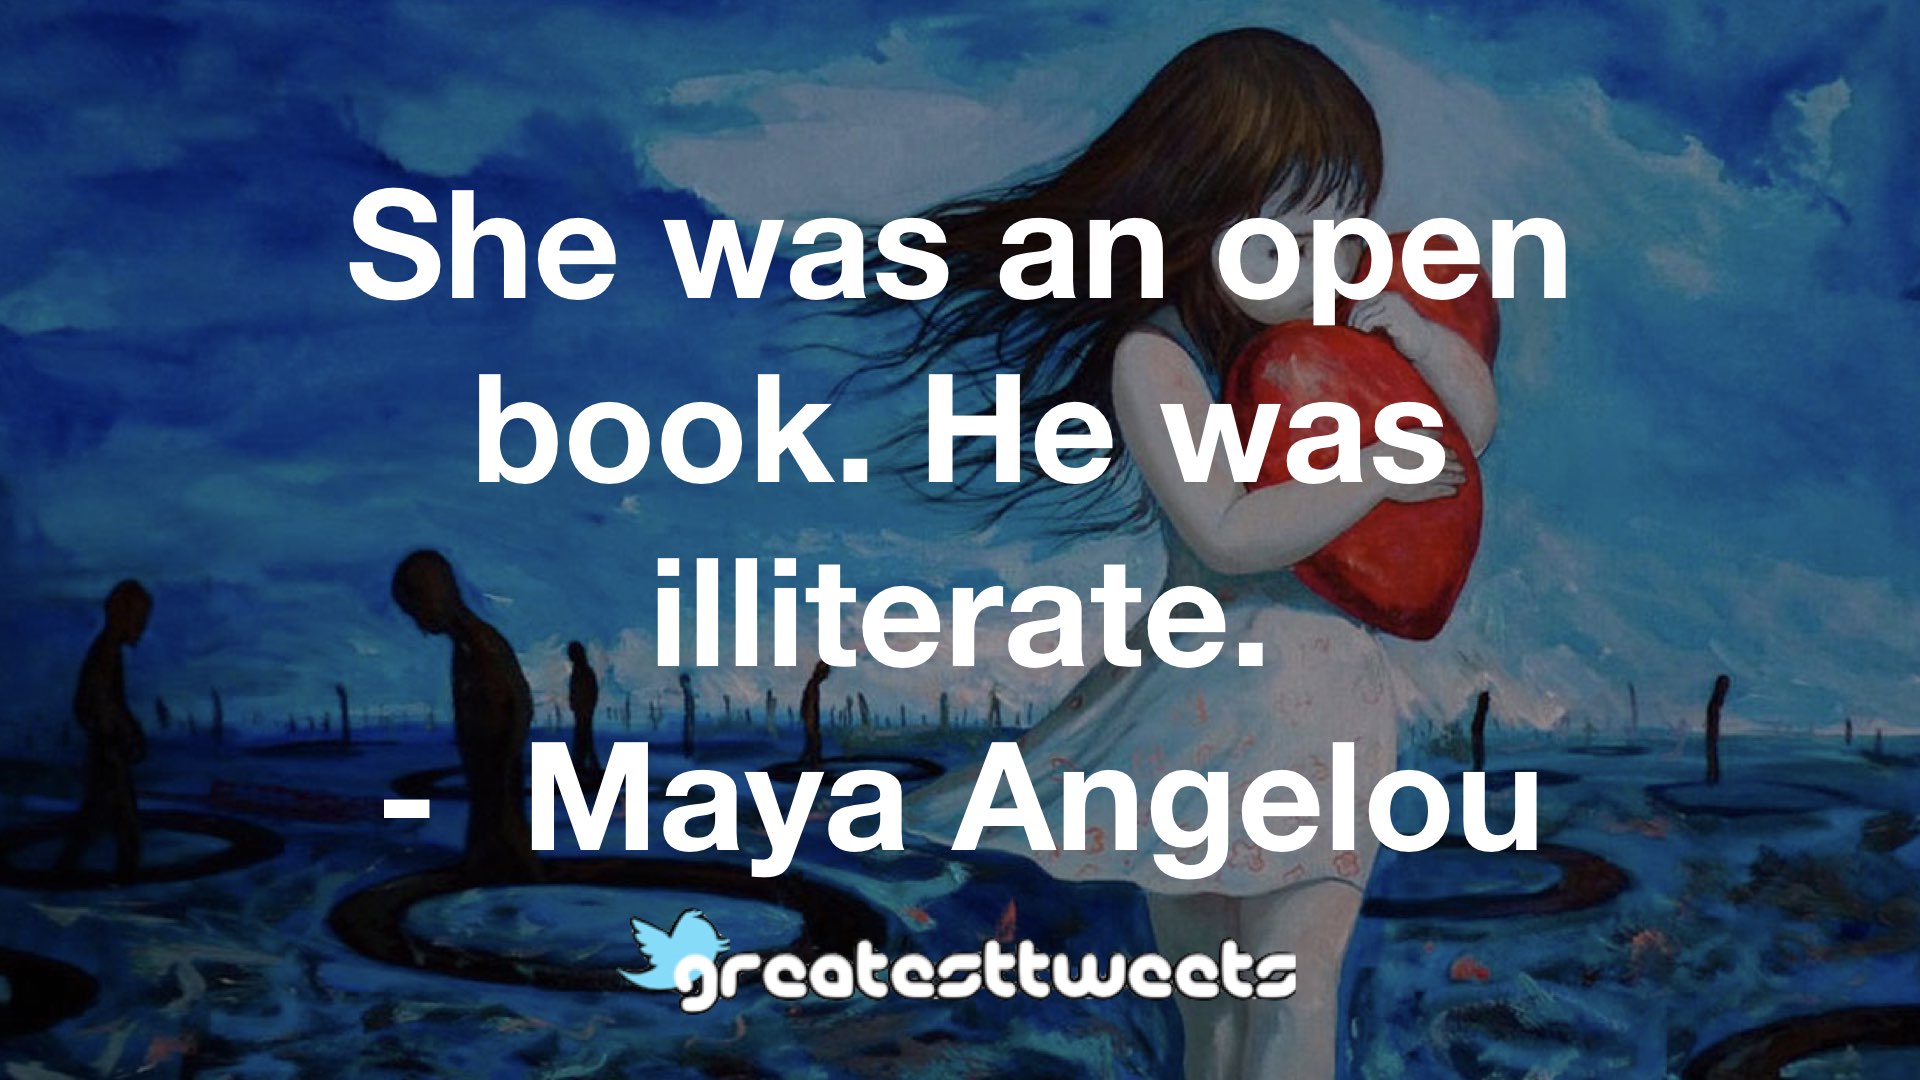 Maya Angelou Quotes GreatestTweets.com